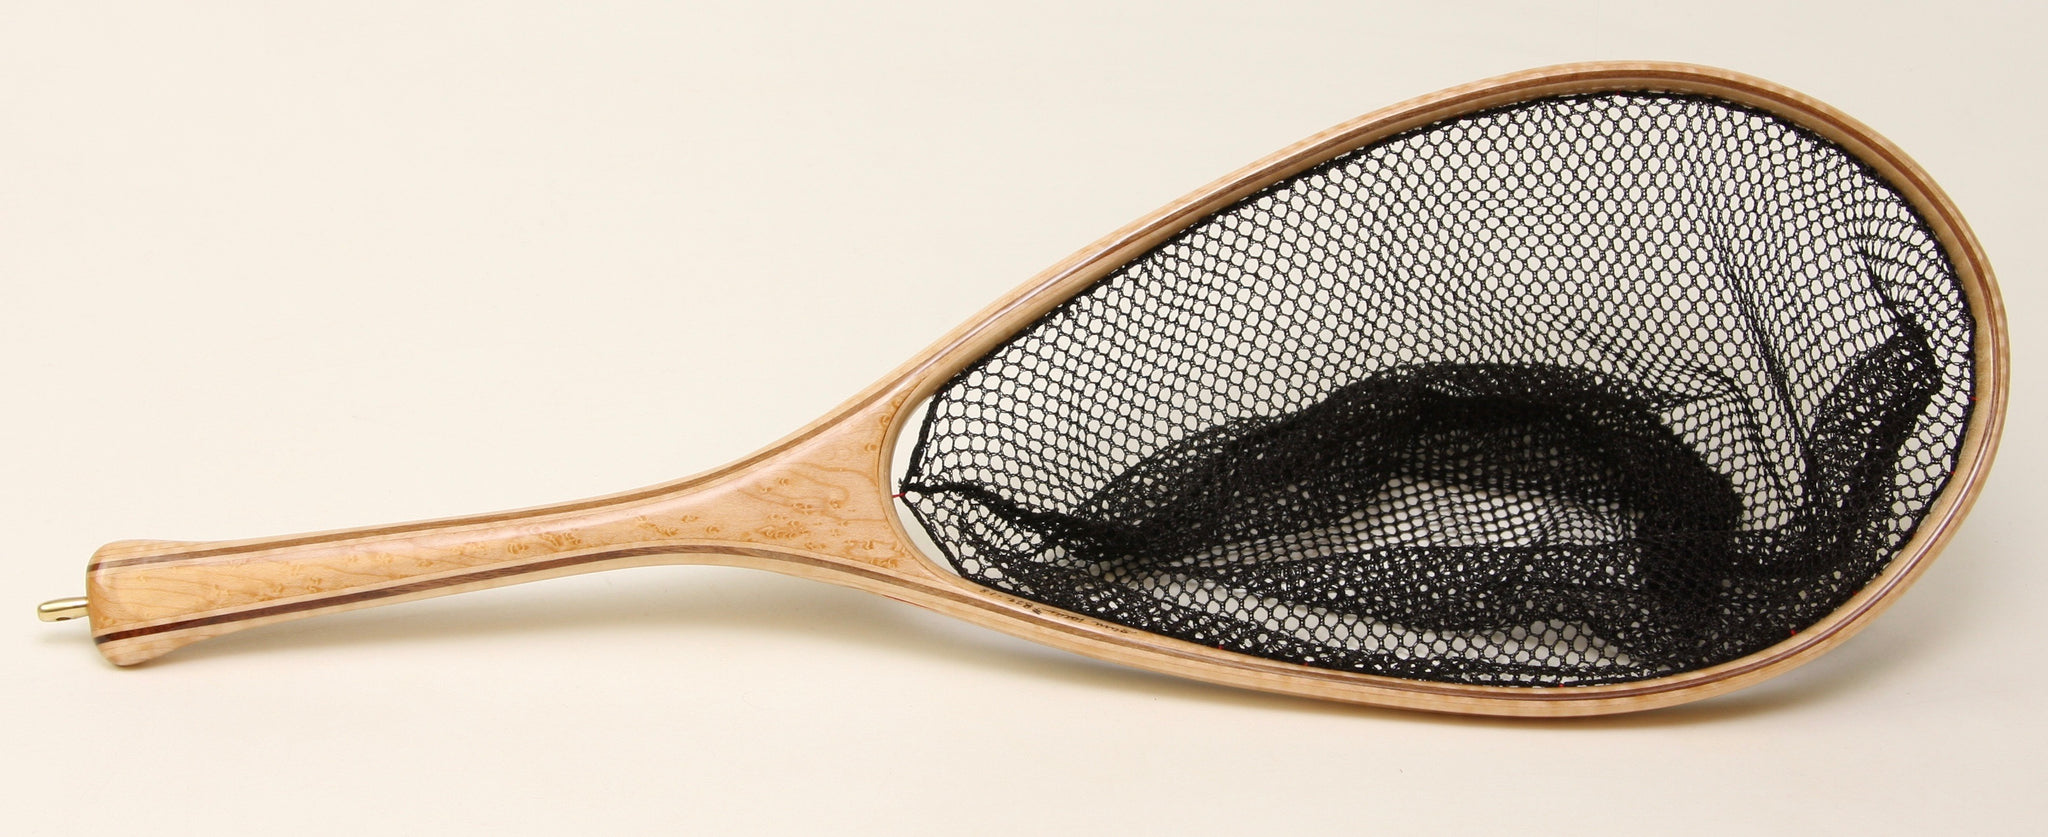 Medium Landing Net with GB Special Hoop in Maple and Walnut - Nets